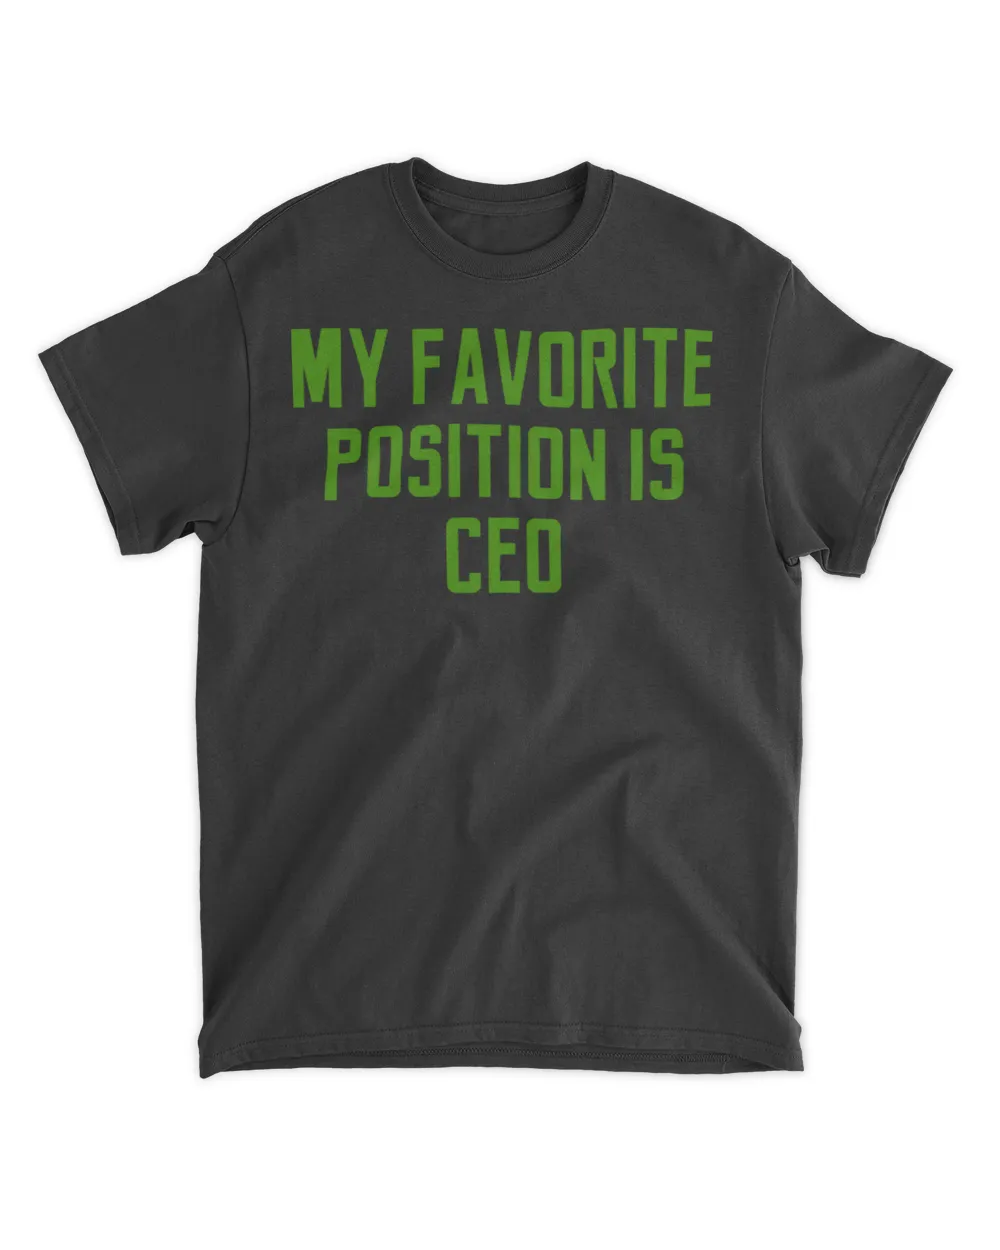  My favorite position is CEO shirt